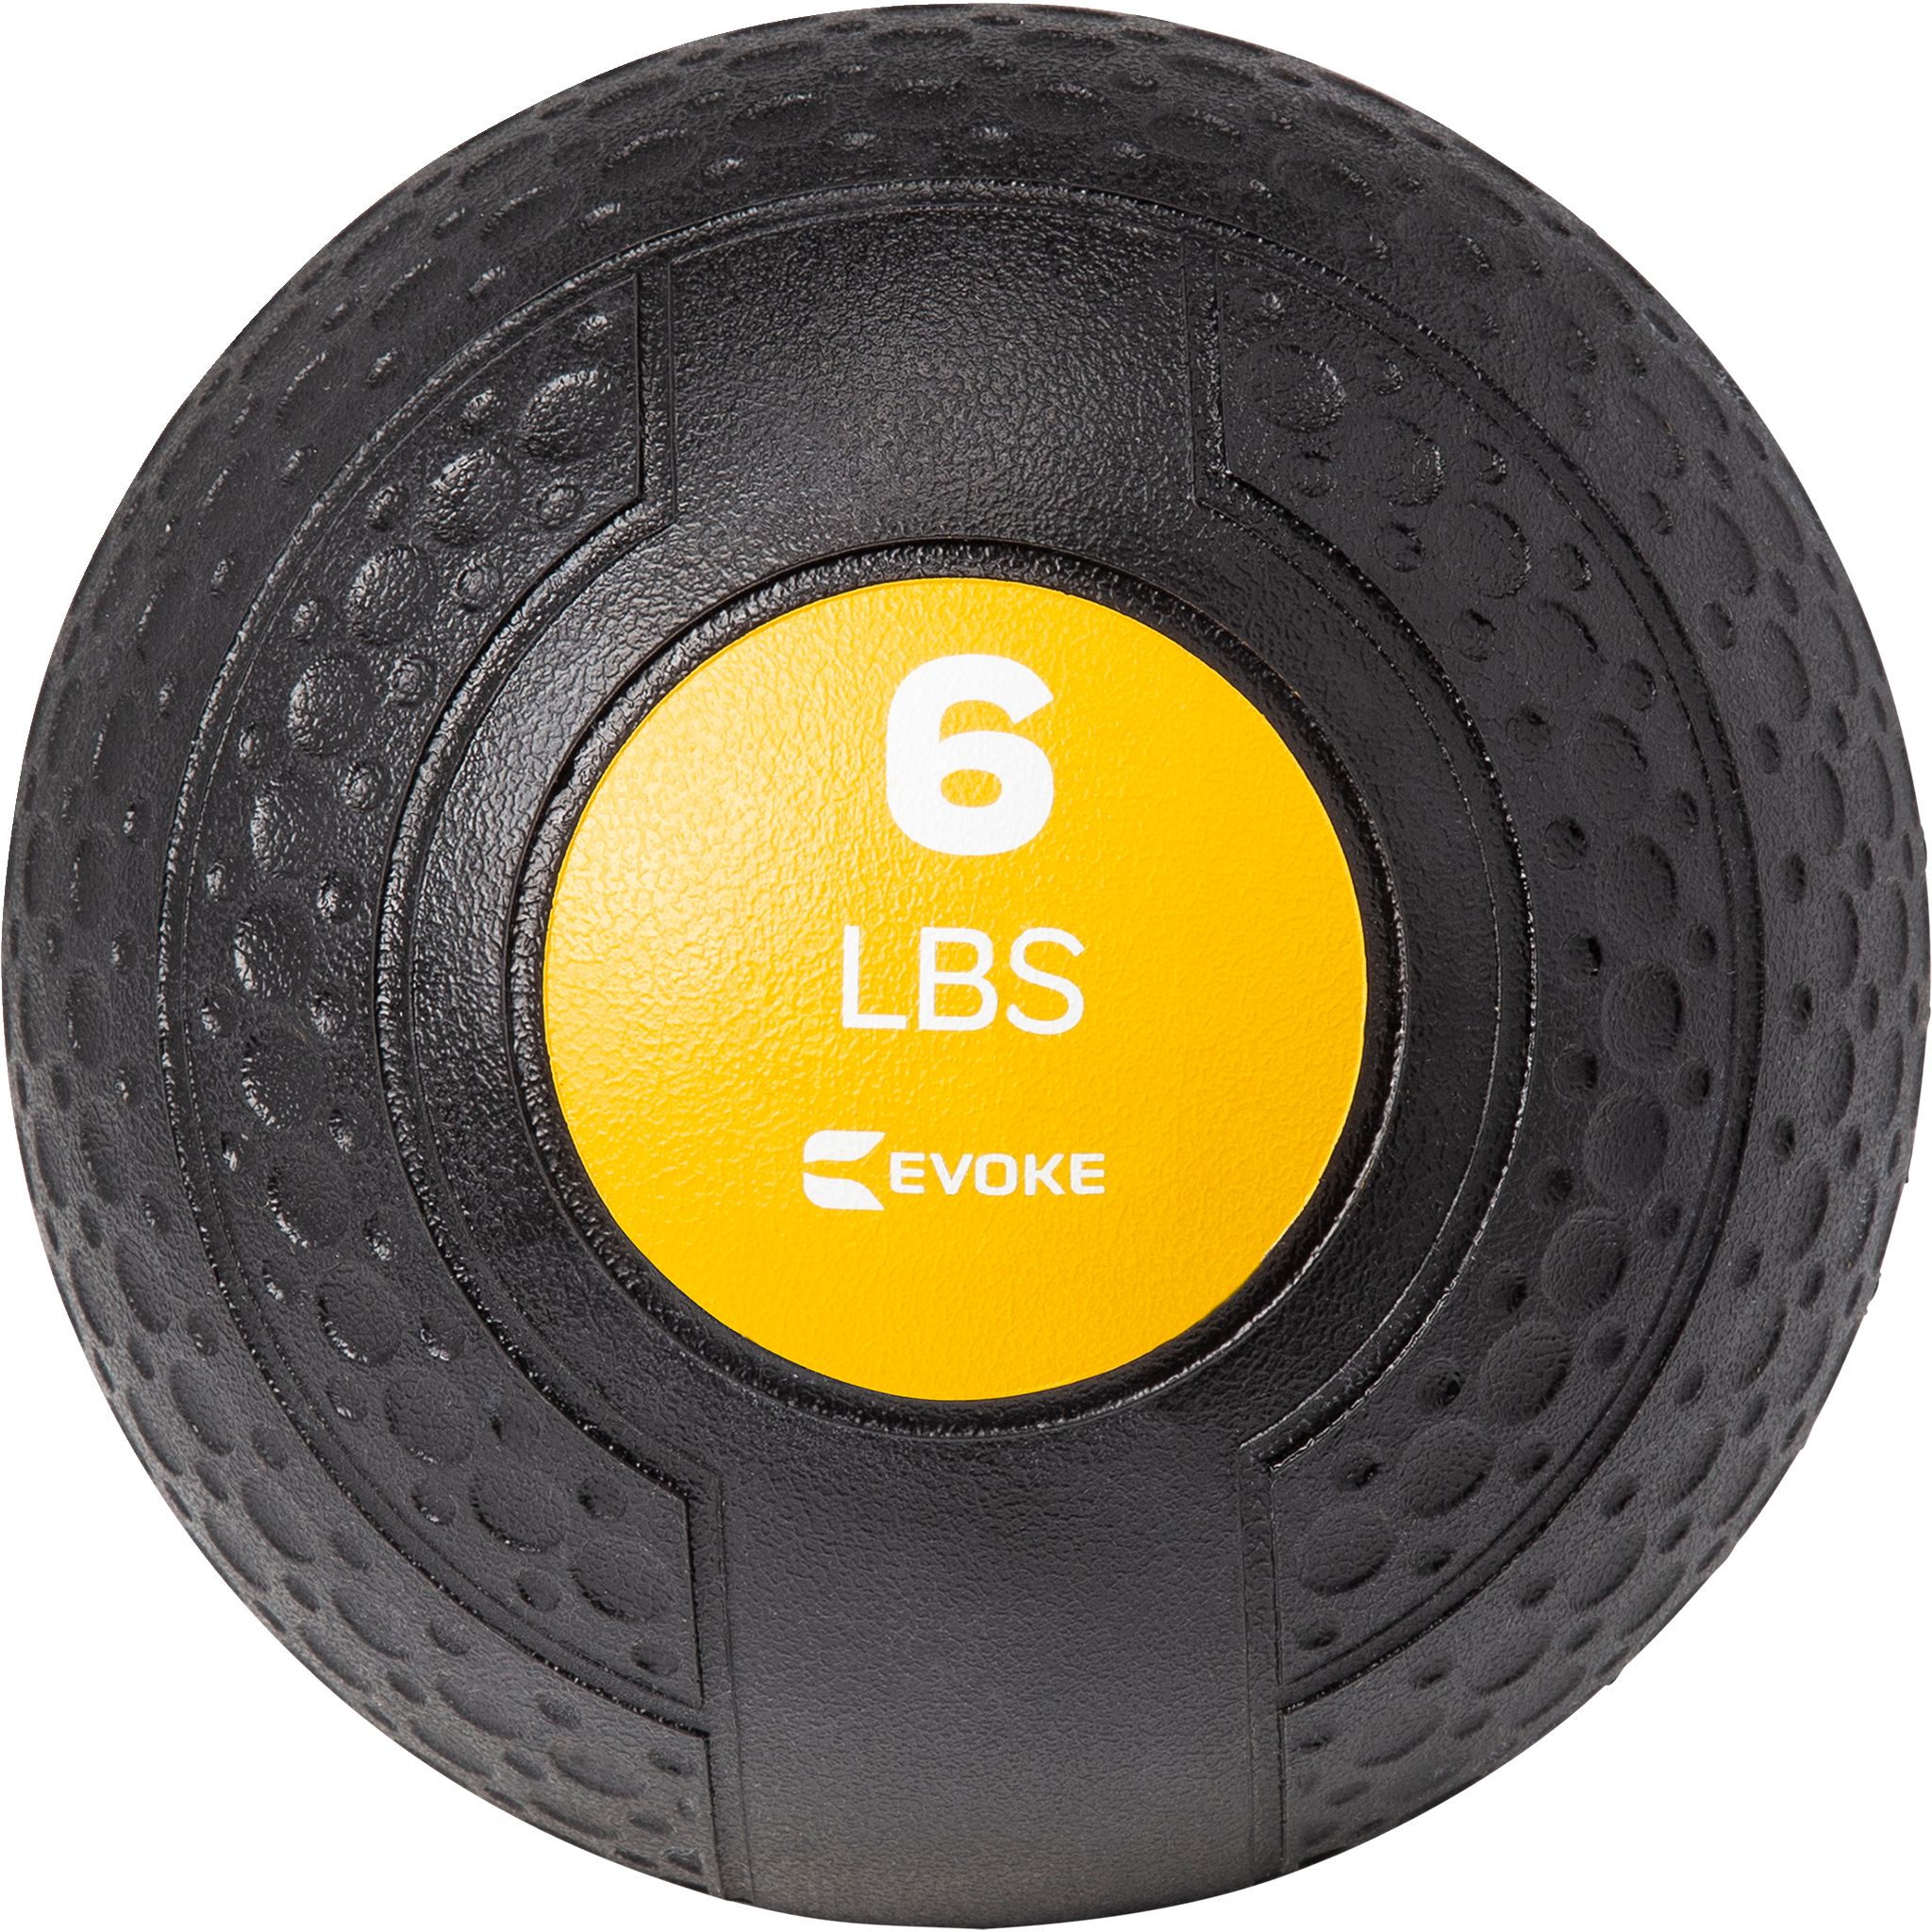 Medicine ball Pure2Improve handles 6Kg - Fitness and weight training -  Accessories - Equipment